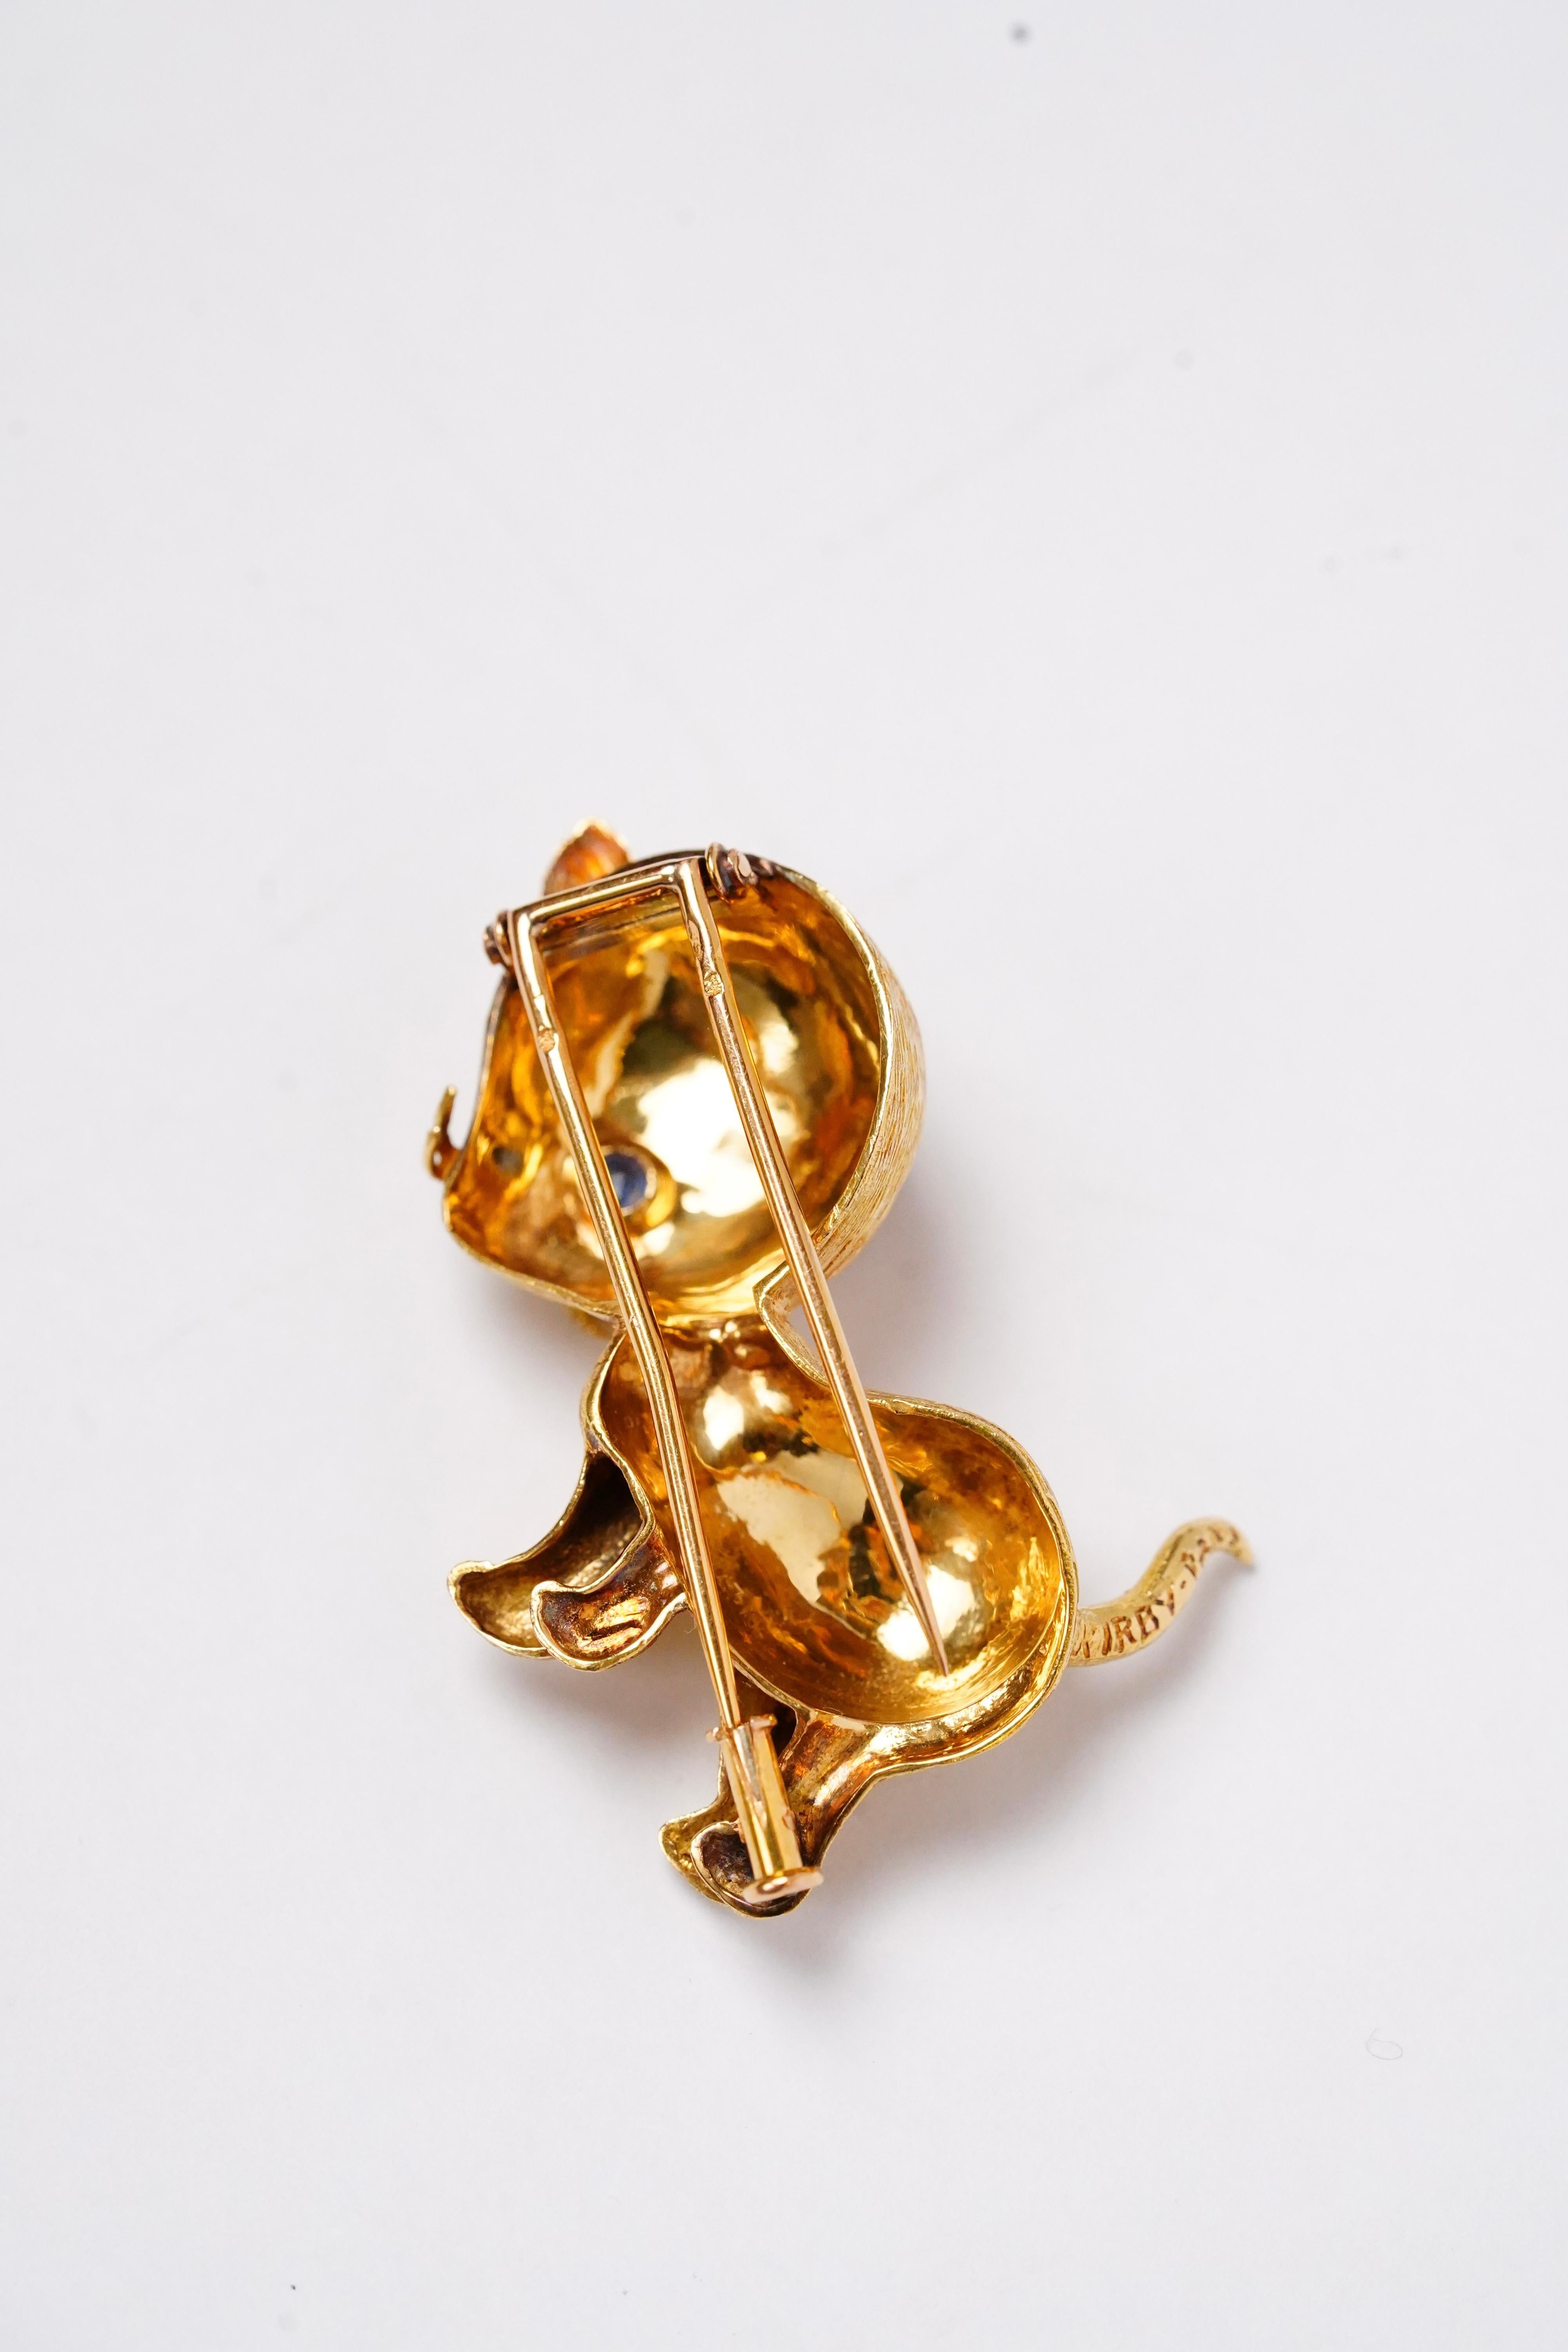 Contemporary Kirby Paris Vintage Yellow Gold Sapphires Kitten Brooch